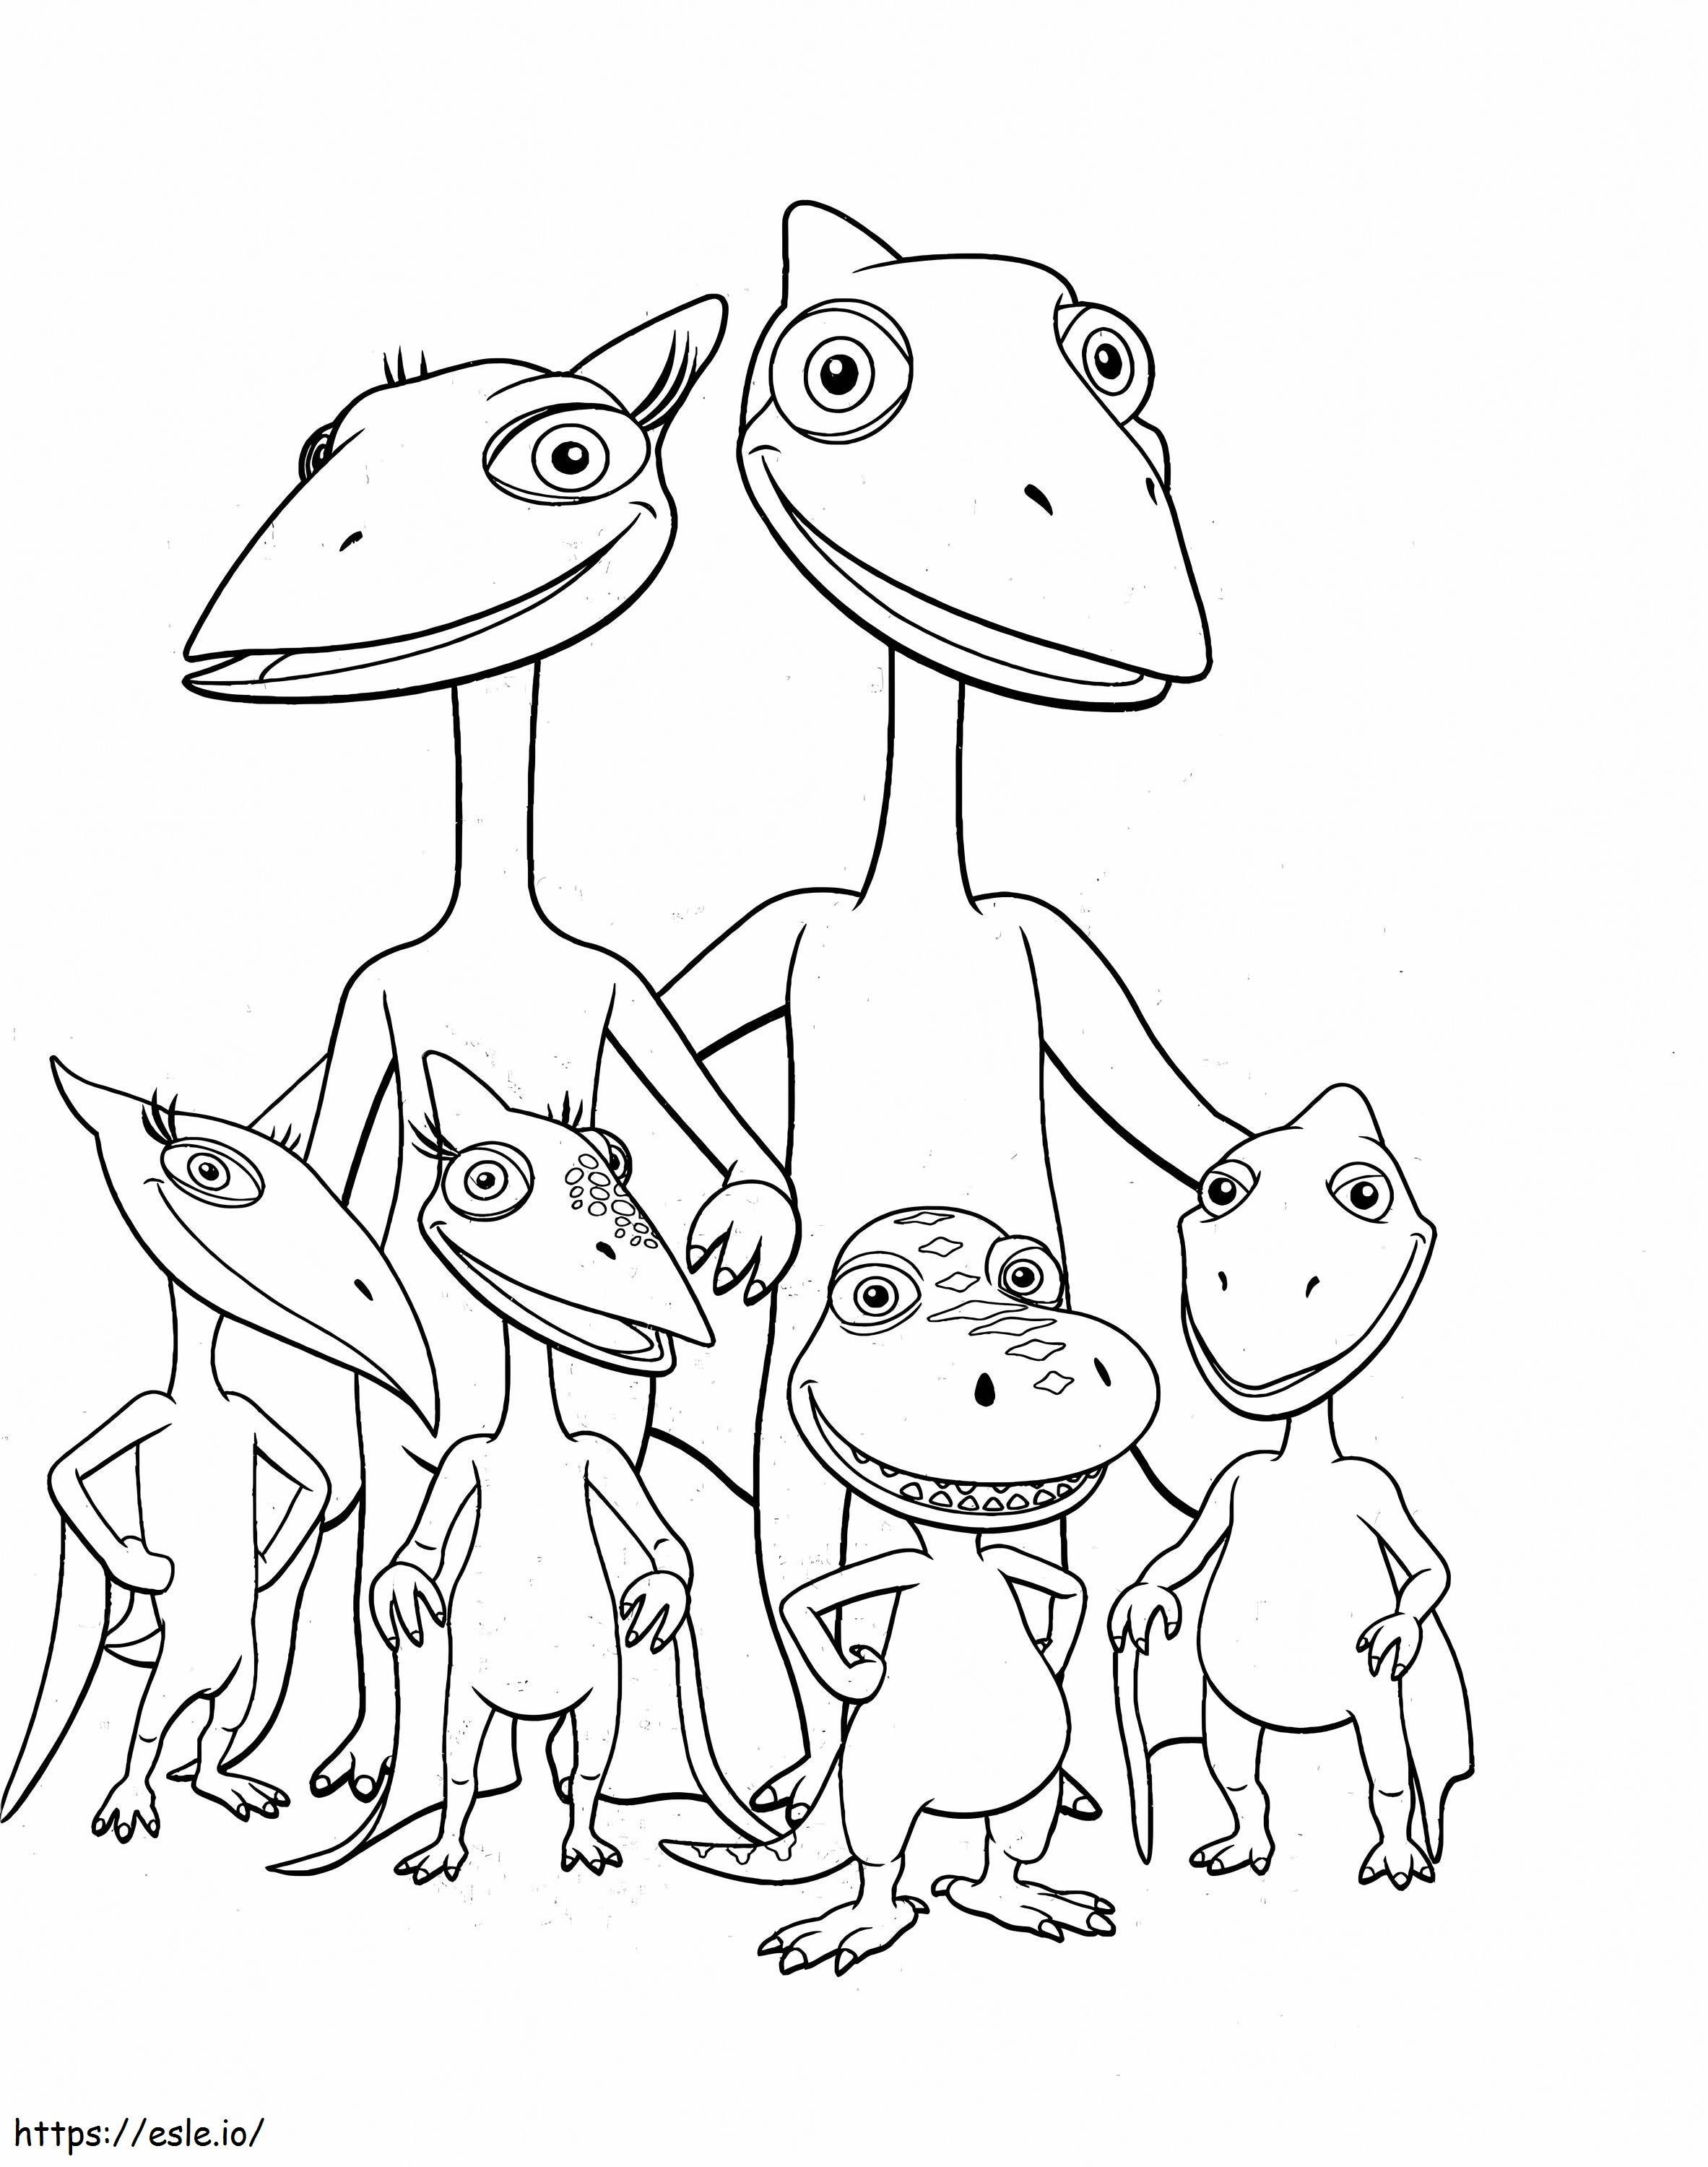 Family Dinosaur coloring page